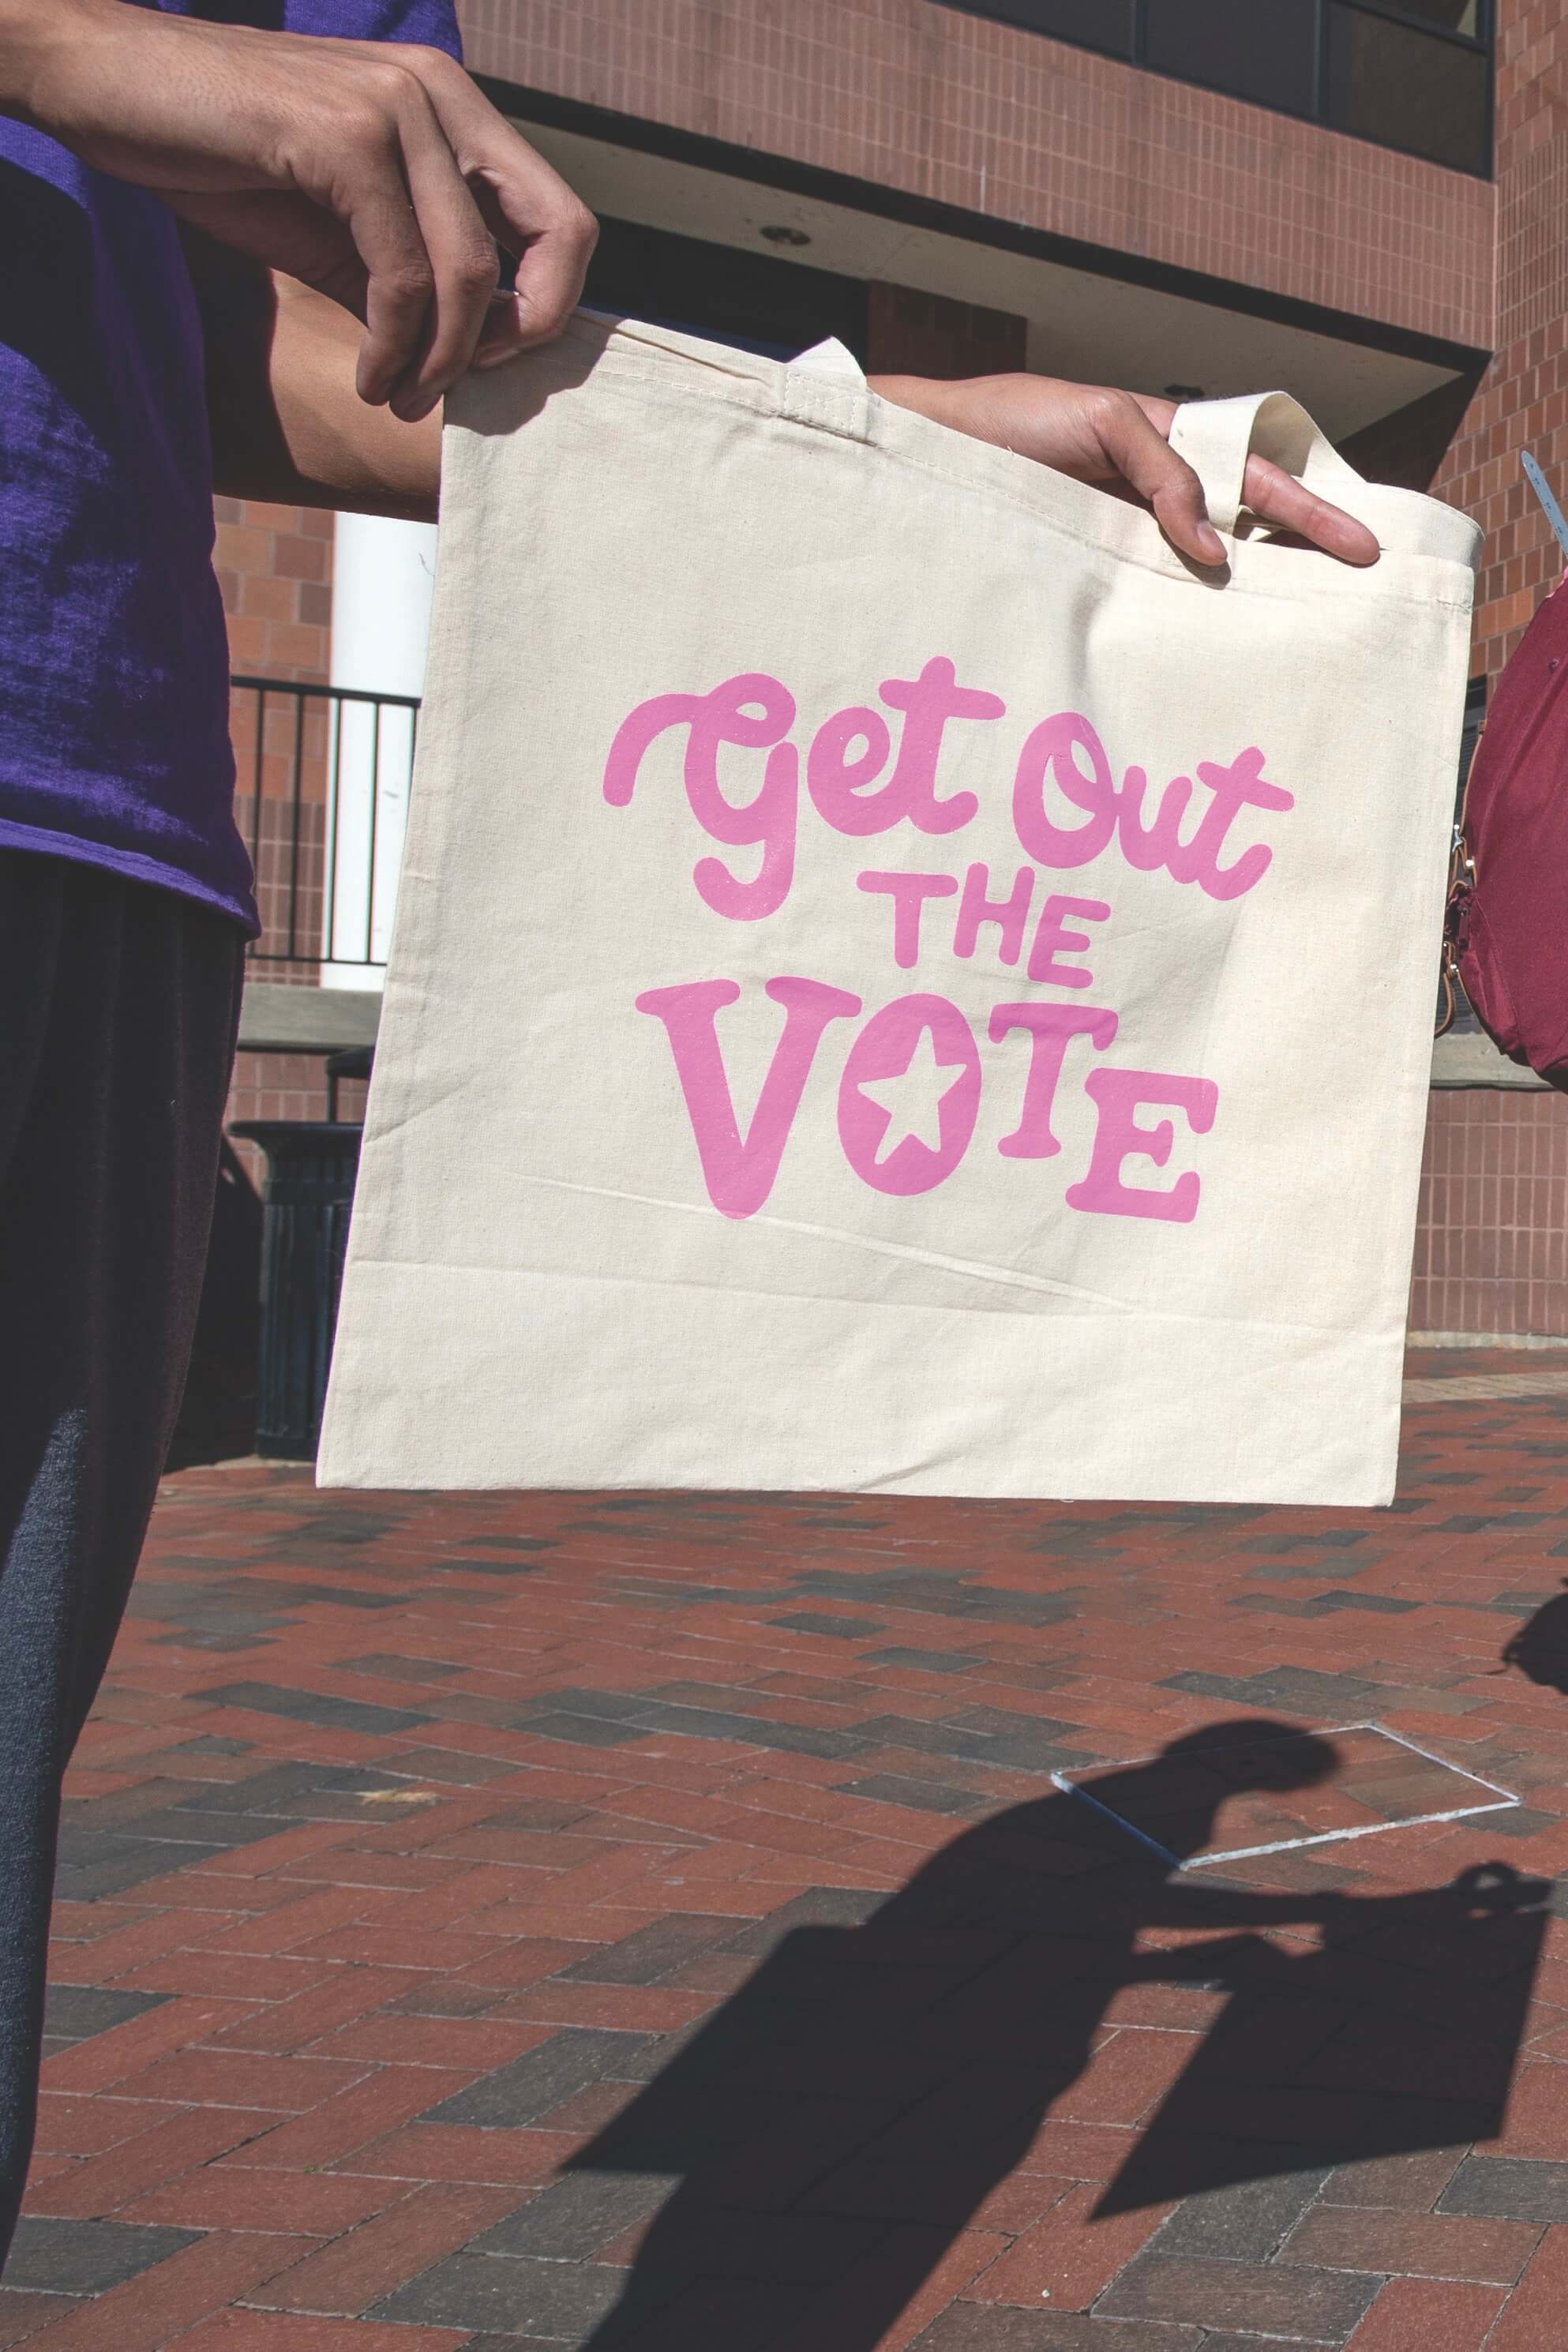 A student holds a Get Out the Vote tote bag in front of the VCU Student Commons